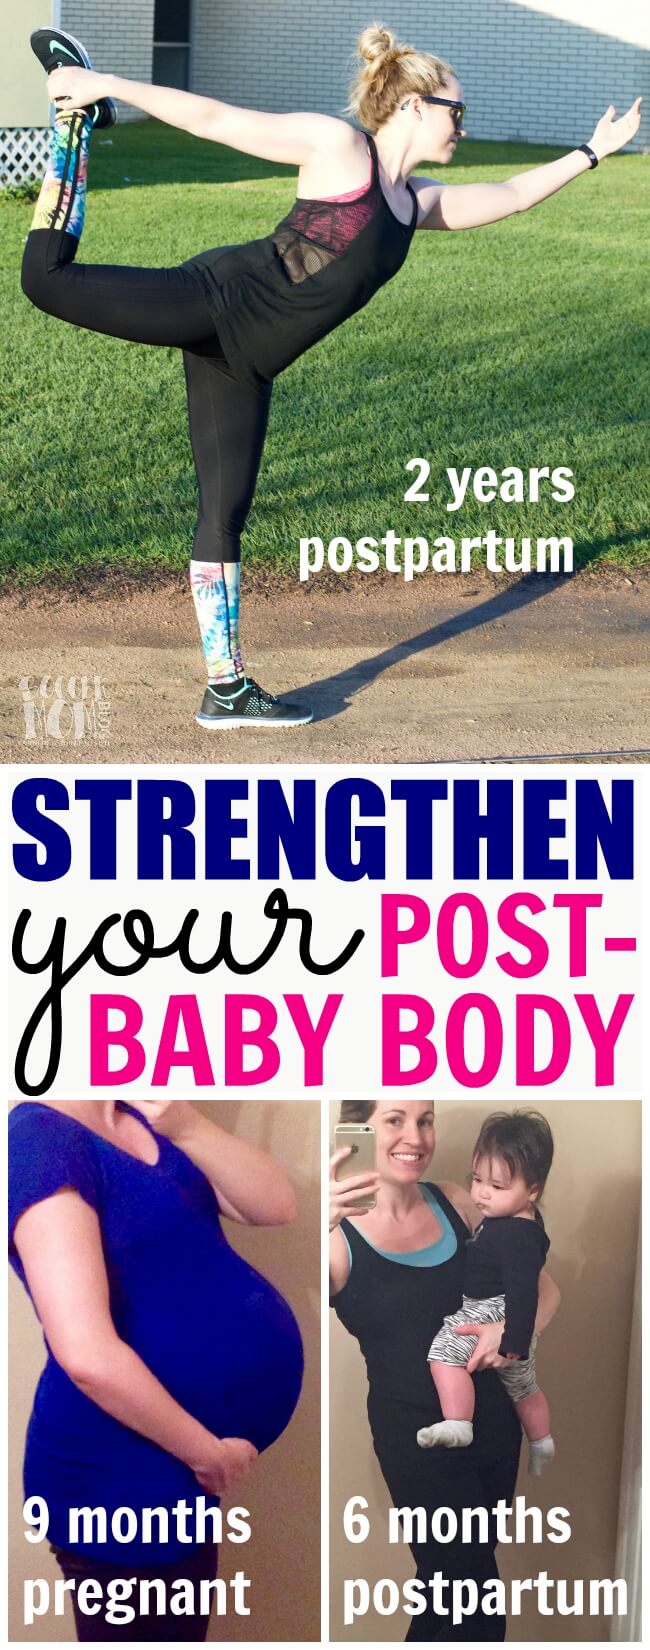 How to strengthen your post baby body, no matter how long its been since you gave birth. Why your postpartum self is actually stronger than you thought!